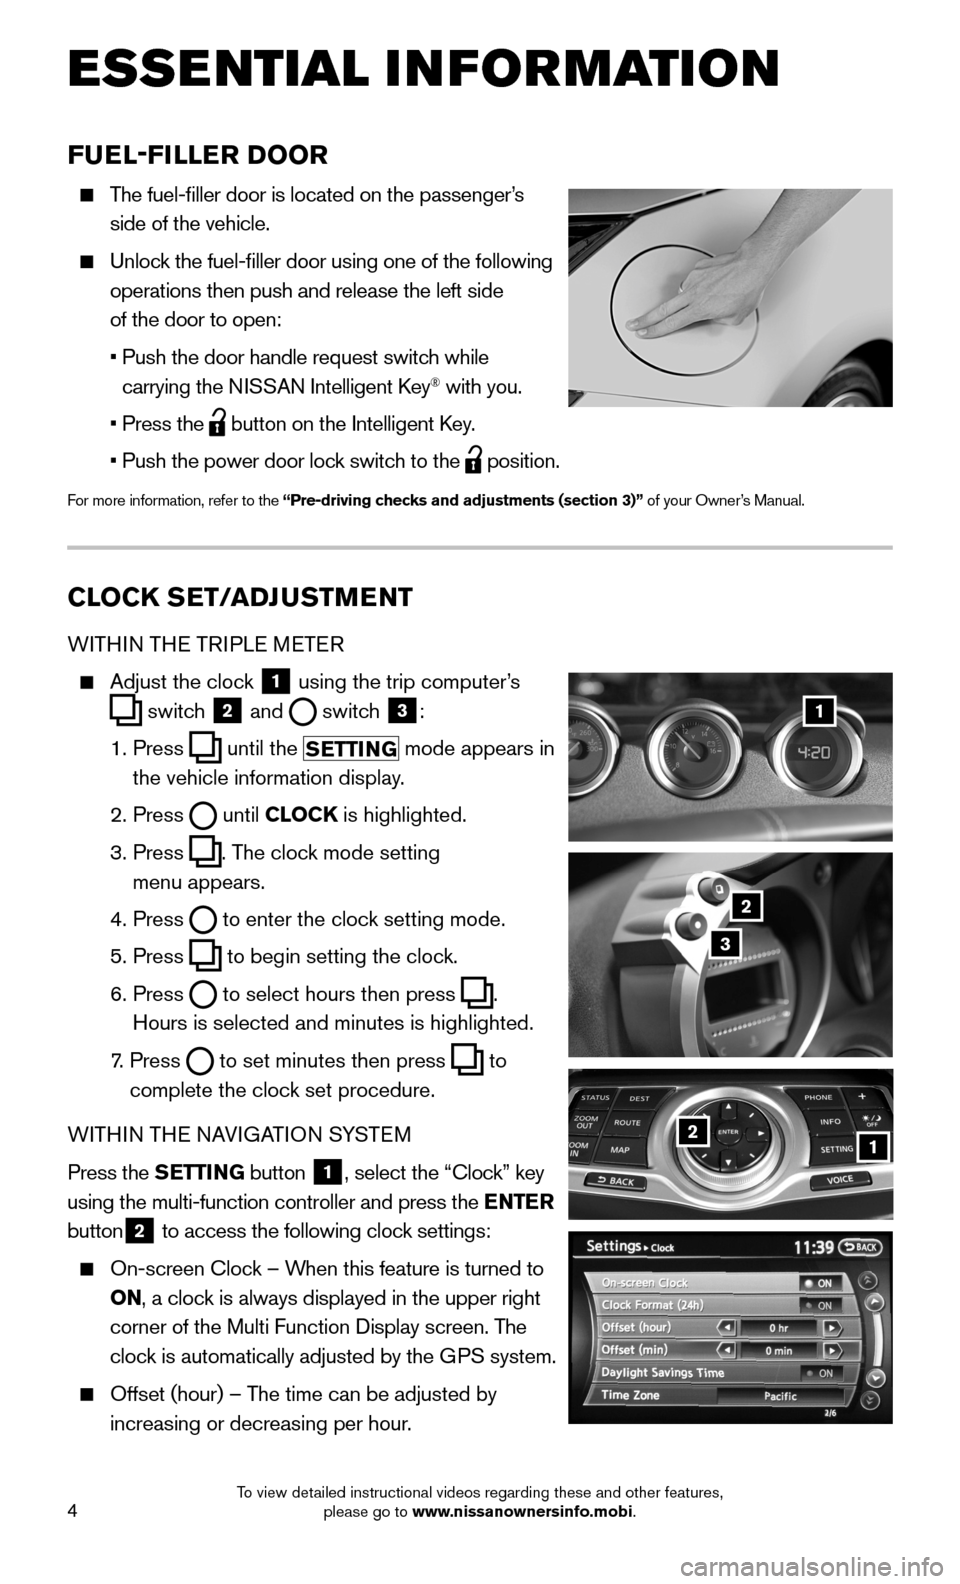 NISSAN 370Z COUPE 2015 Z34 Quick Reference Guide 4
ESSE NTIAL I N FOR MATION
CLOCK SET/ADJUSTMENT
WITHIN THE TRIPLE METER
    Adjust the clock 1 using the trip computer’s 
 switch 2 and  switch 3:
    1.  Press  until the SETTING mode appears in 
